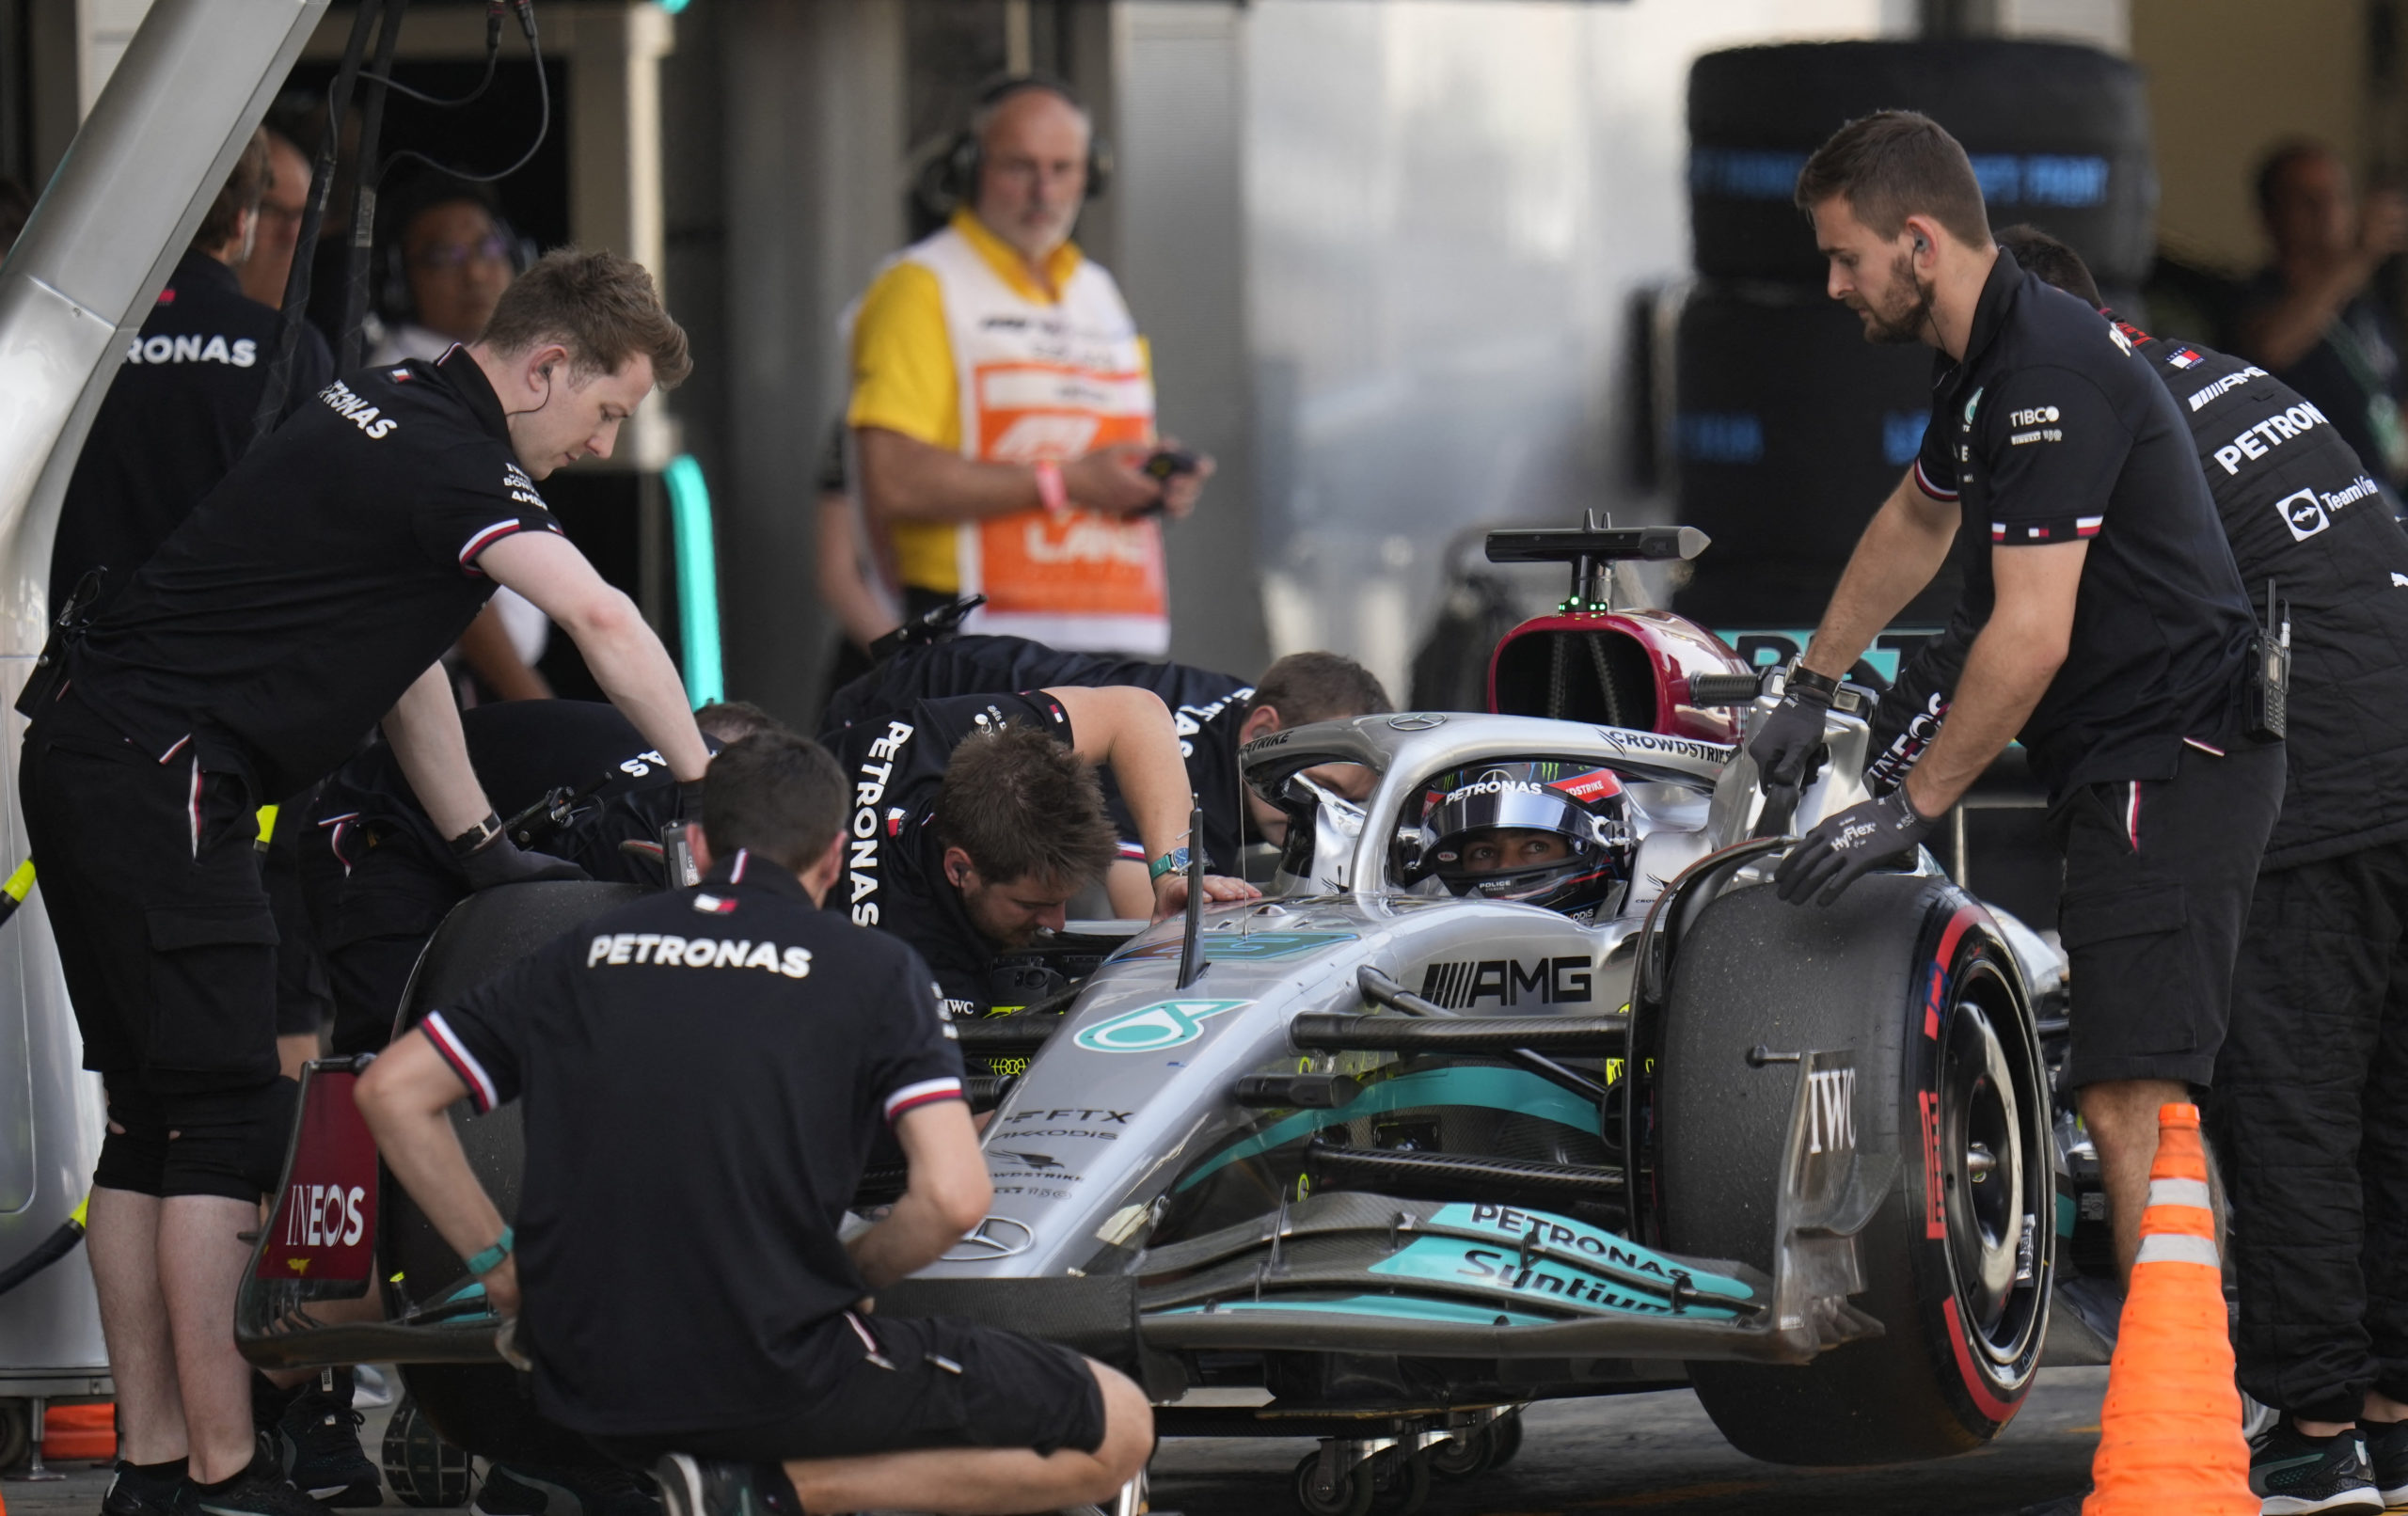 Formula One F1 - Spanish Grand Prix - Circuit de Barcelona-Catalunya, Barcelona, Spain - May 21, 2022 Mercedes' George Russell in the pits during qualifying Pool via REUTERS/Manu Fernandez